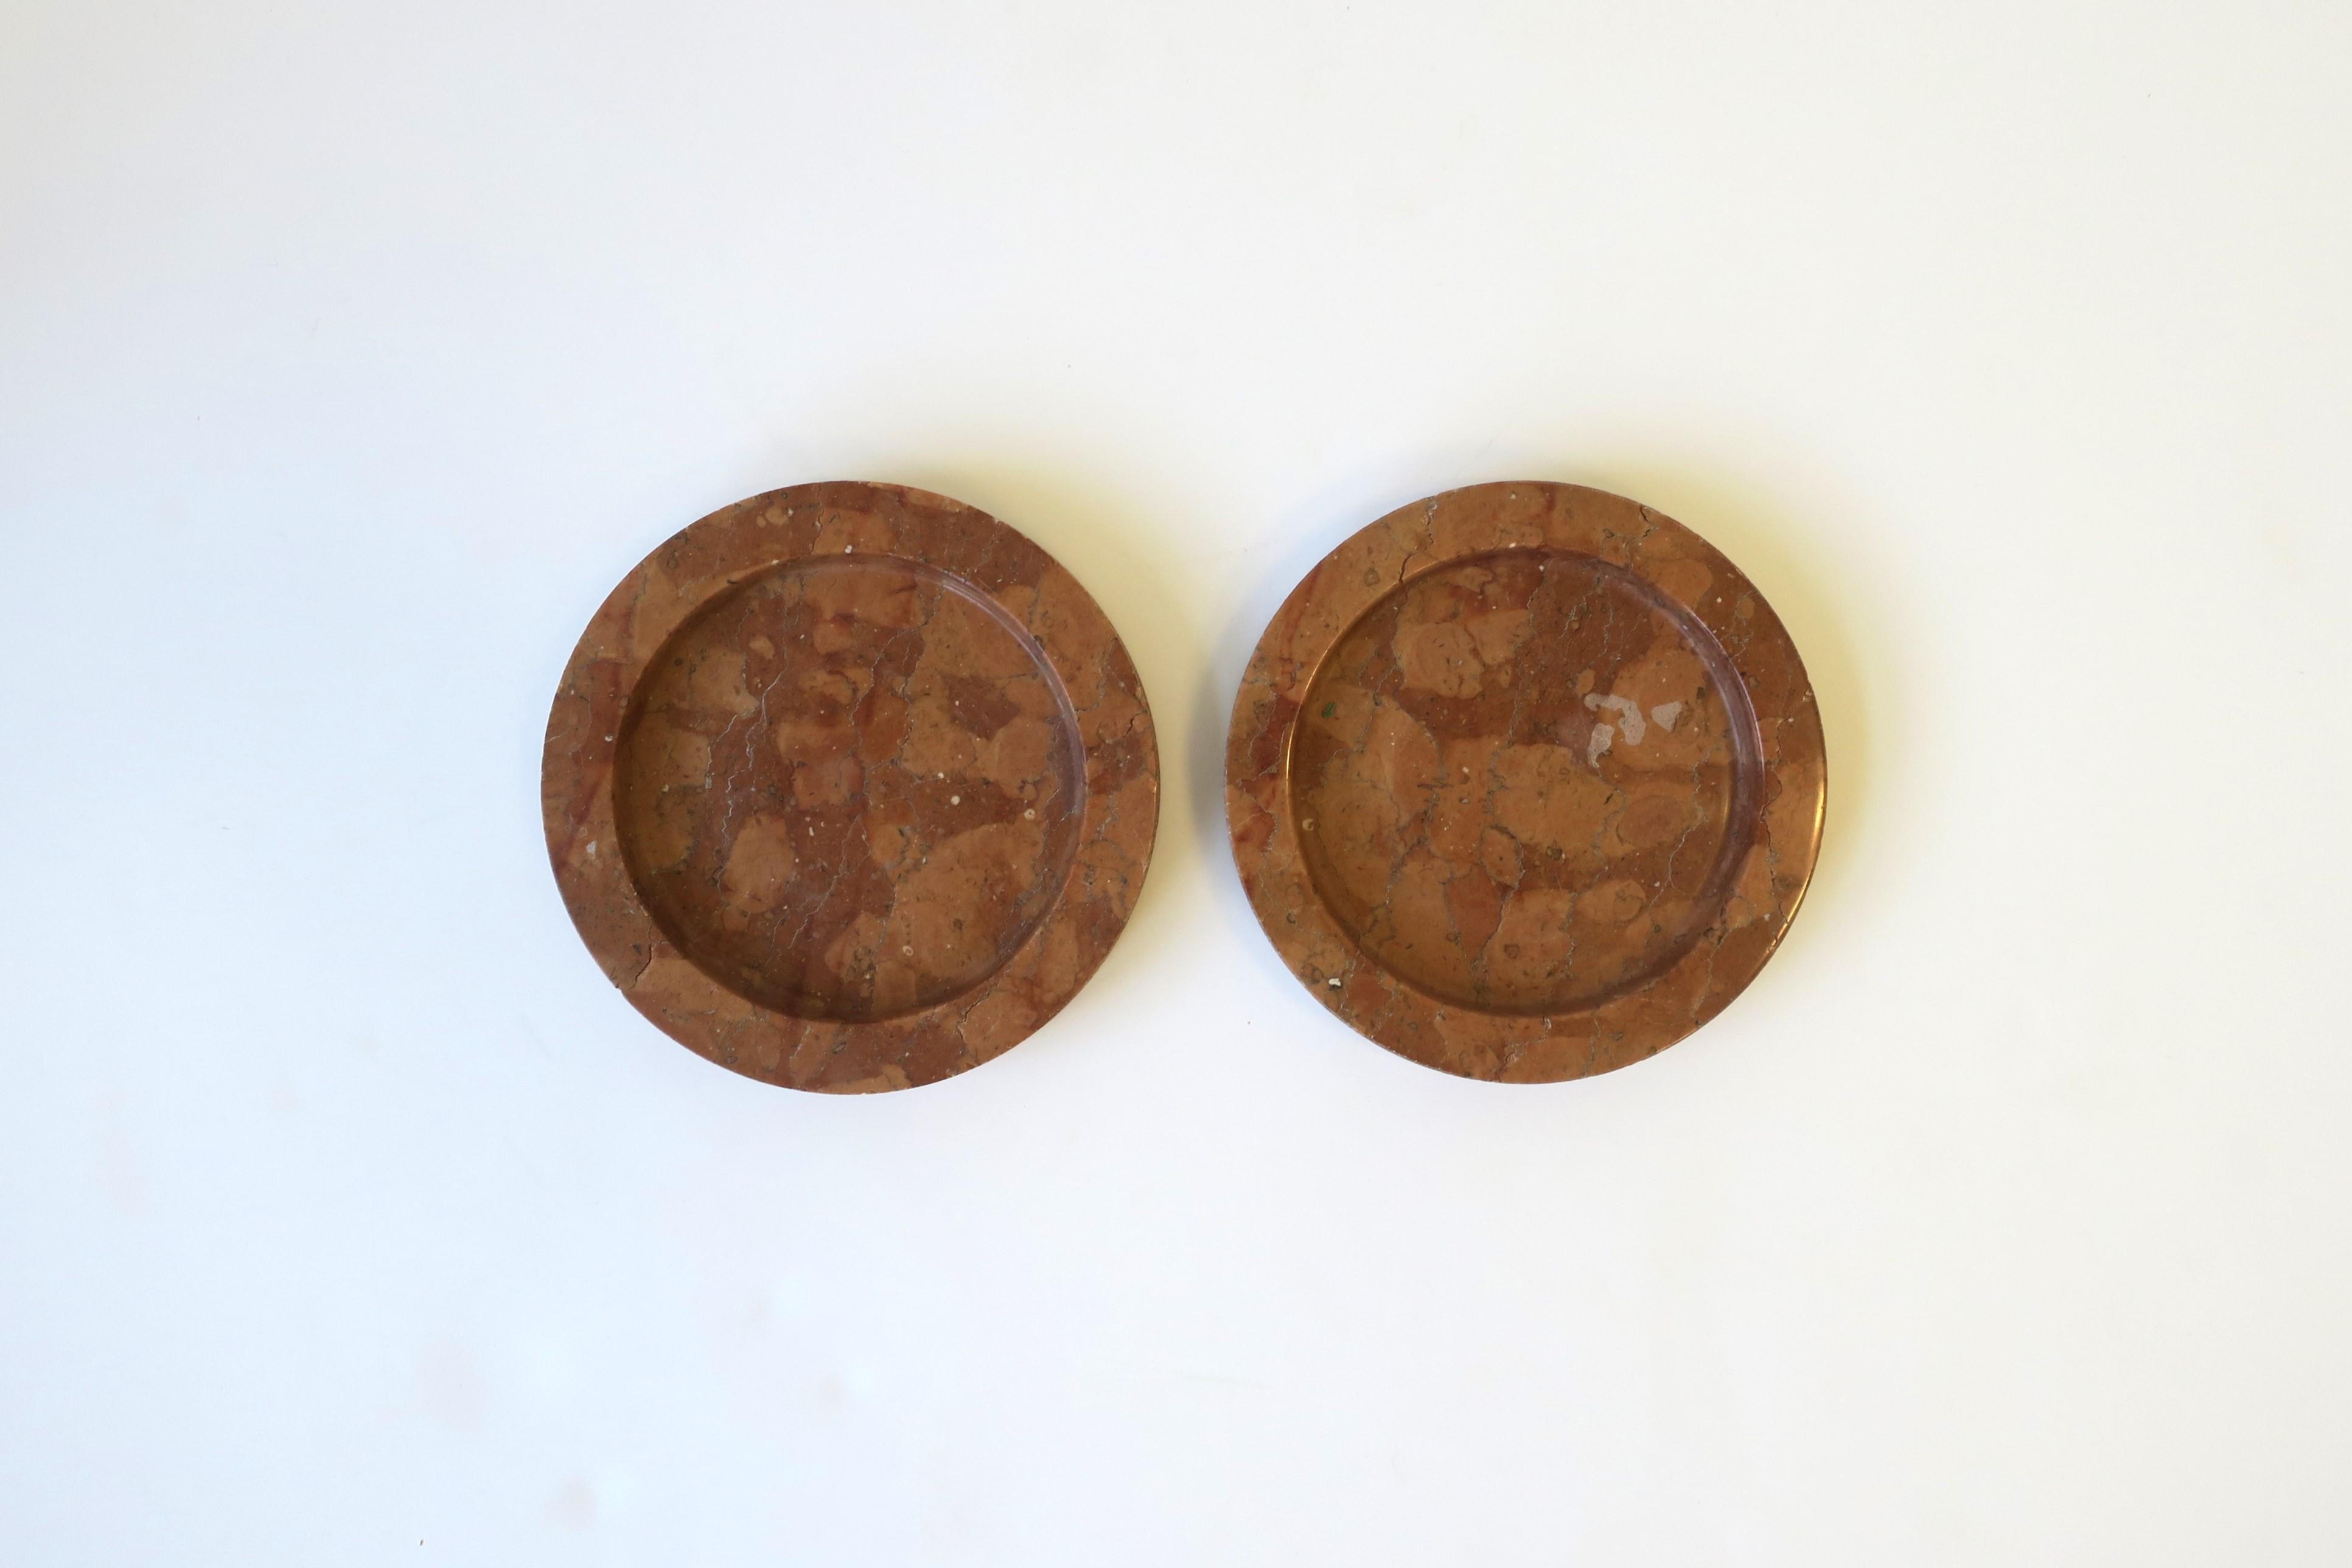 A set of two (2) Italian Postmodern marble terracotta hue wine bottle table coasters, circa late-20th century, Italy. A substantial pair of marble wine or water bottle table coasters. Hue is terracotta. Pieces could also be used as a jewelry or desk